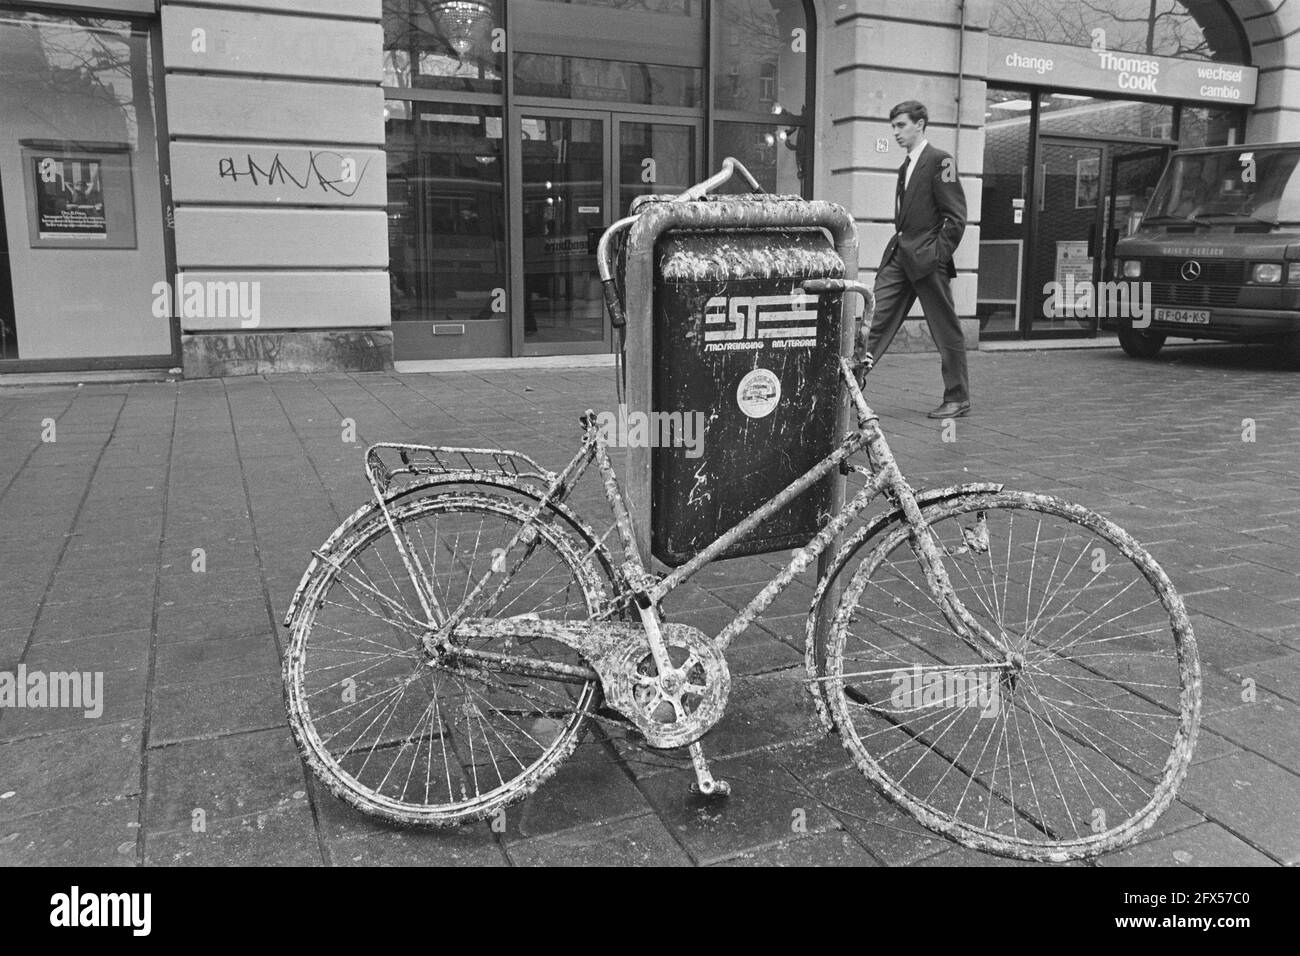 Bicycle full of bird droppings on Leidseplein Amsterdam, February 5, 1987, bicycles, The Netherlands, 20th century press agency photo, news to remember, documentary, historic photography 1945-1990, visual stories, human history of the Twentieth Century, capturing moments in time Stock Photo